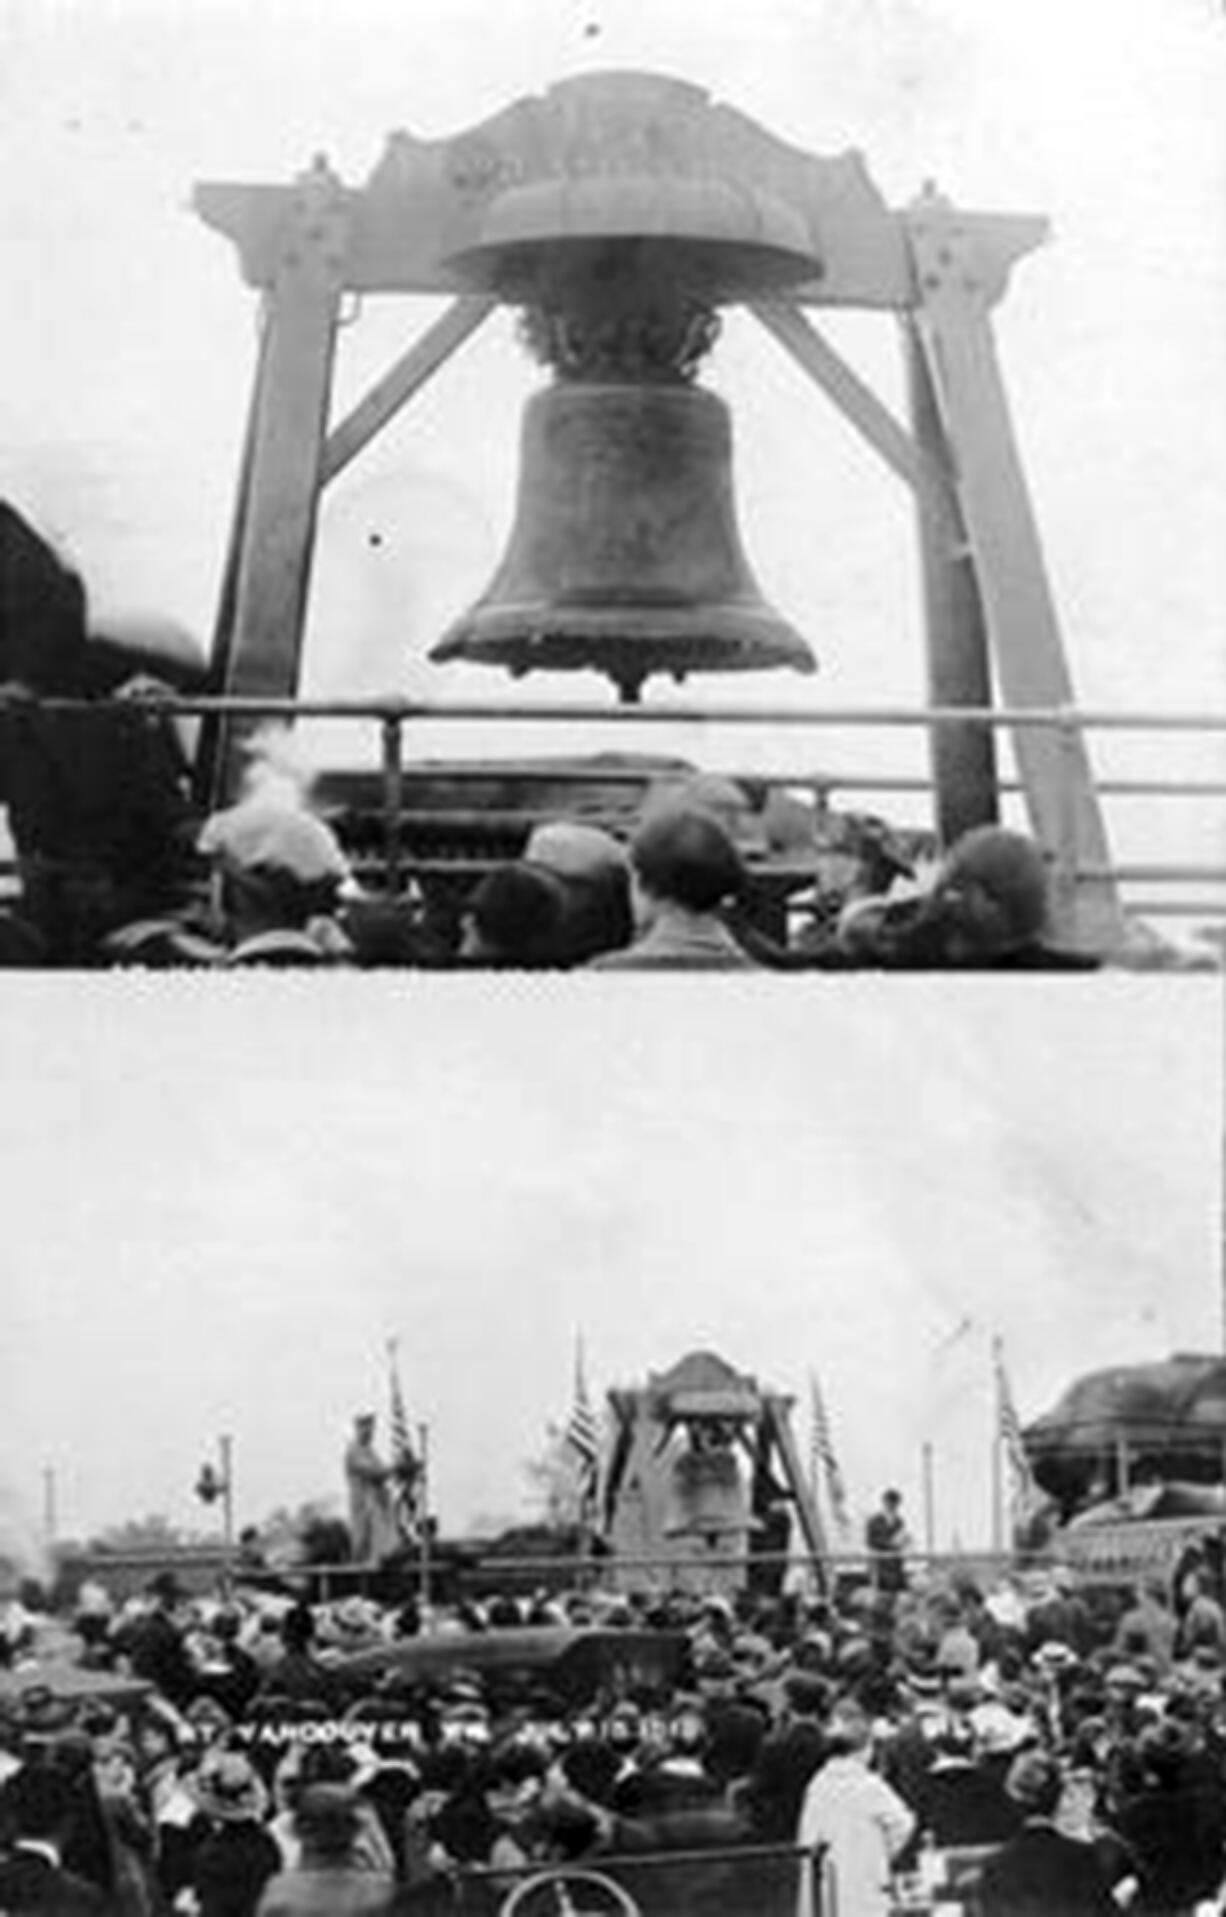 Two photos of the Liberty Bell, a close-up and a wide-angle, show the early morning crowd gathered near Vancouver's Northern Pacific railroad depot. The bell toured the nation's heartland and then headed down the West Coast to promote the San Francisco Panama-Pacific Exhibition in the summer of 1915.